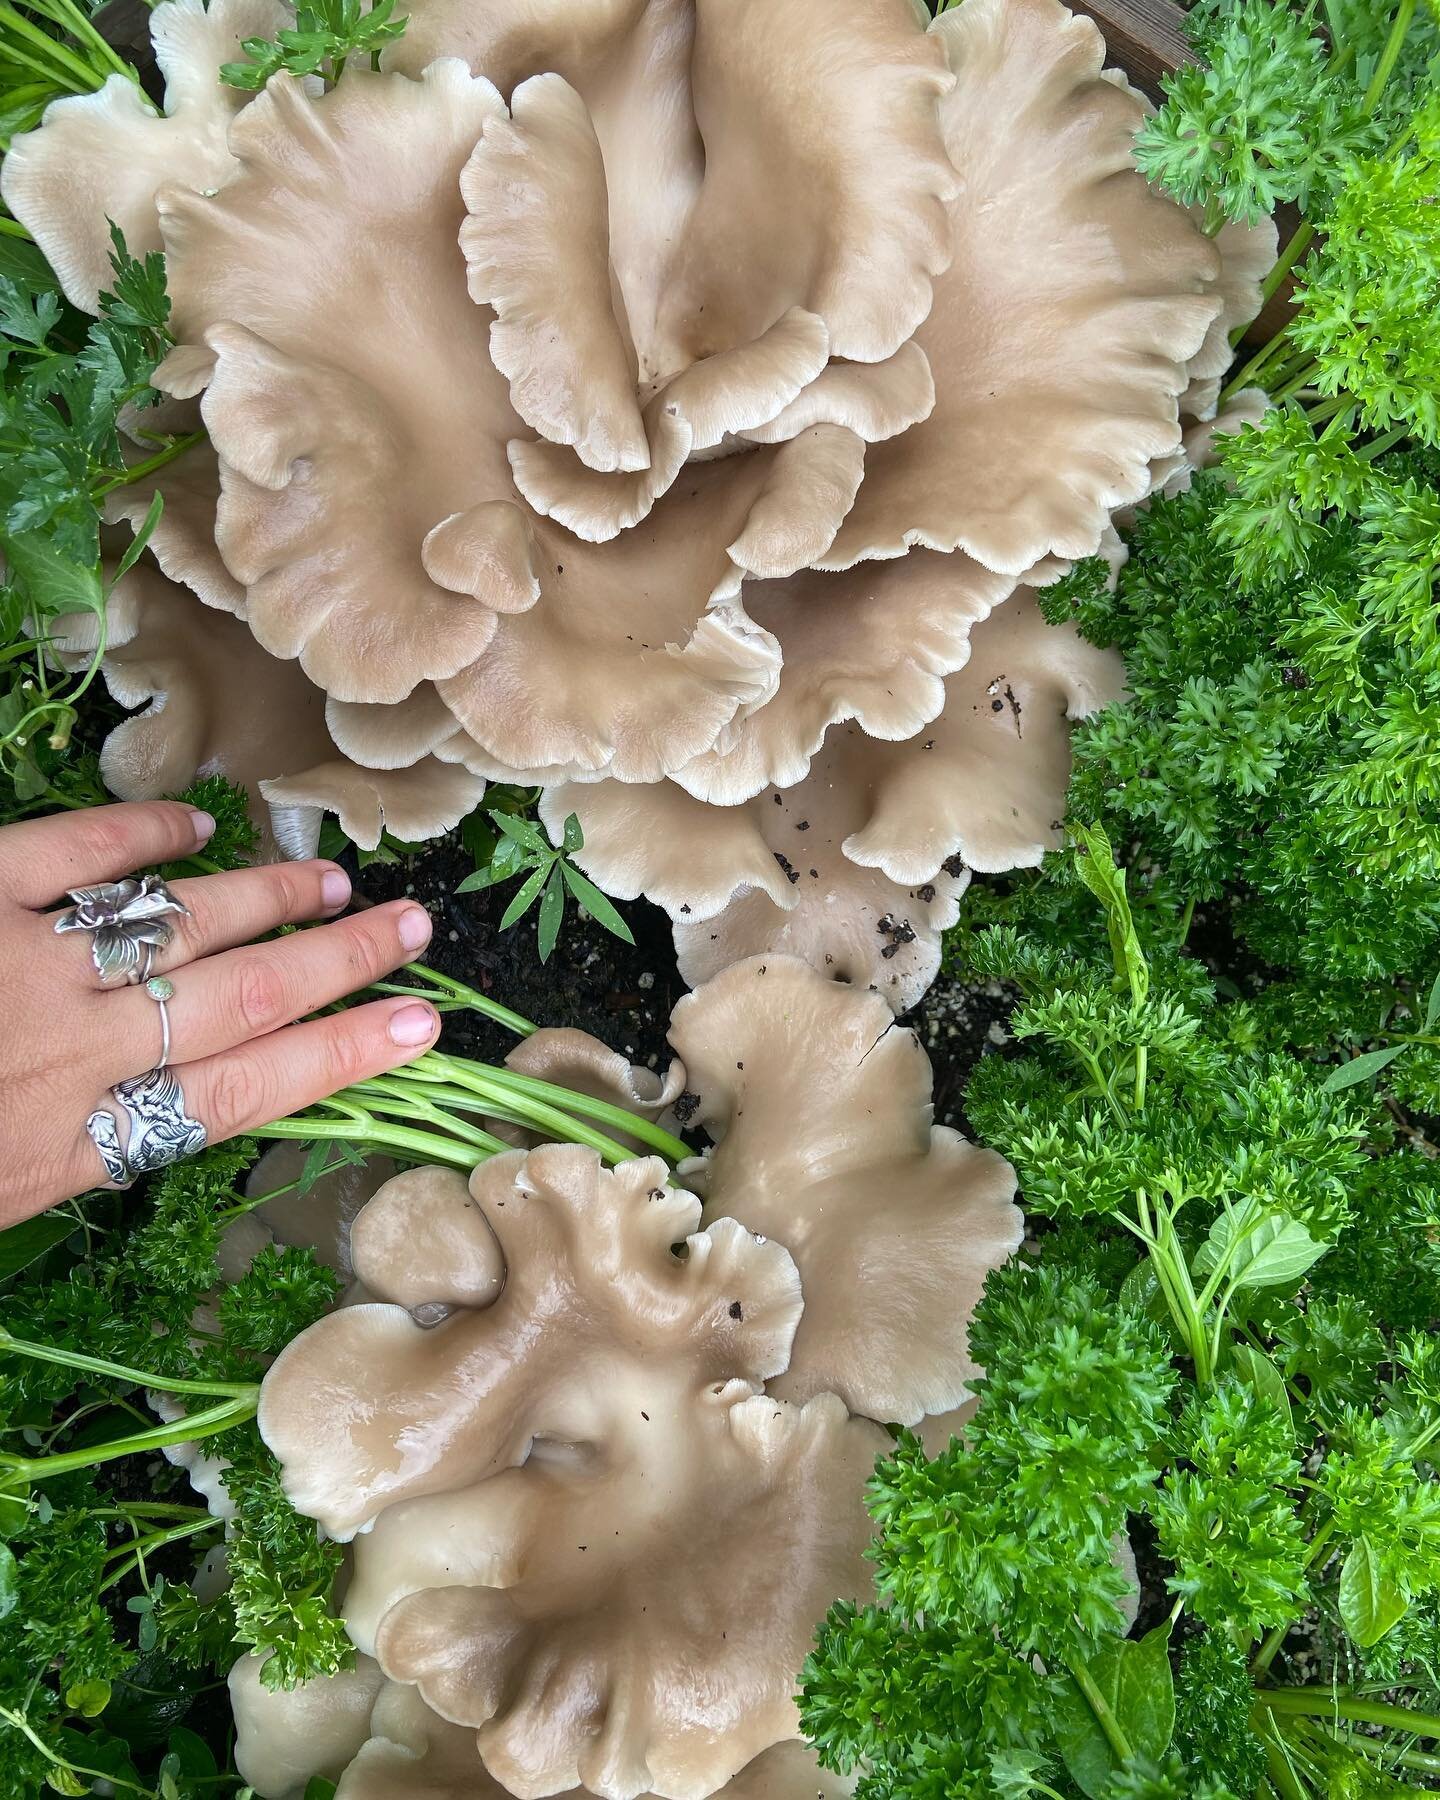 We&rsquo;re all about finding creative ways to deal with waste on the farm. When we&rsquo;re done harvesting from our mushroom fruiting block we will make mushroom compost or break up the blocks and utilize them in our garden beds/field rows. Its so 